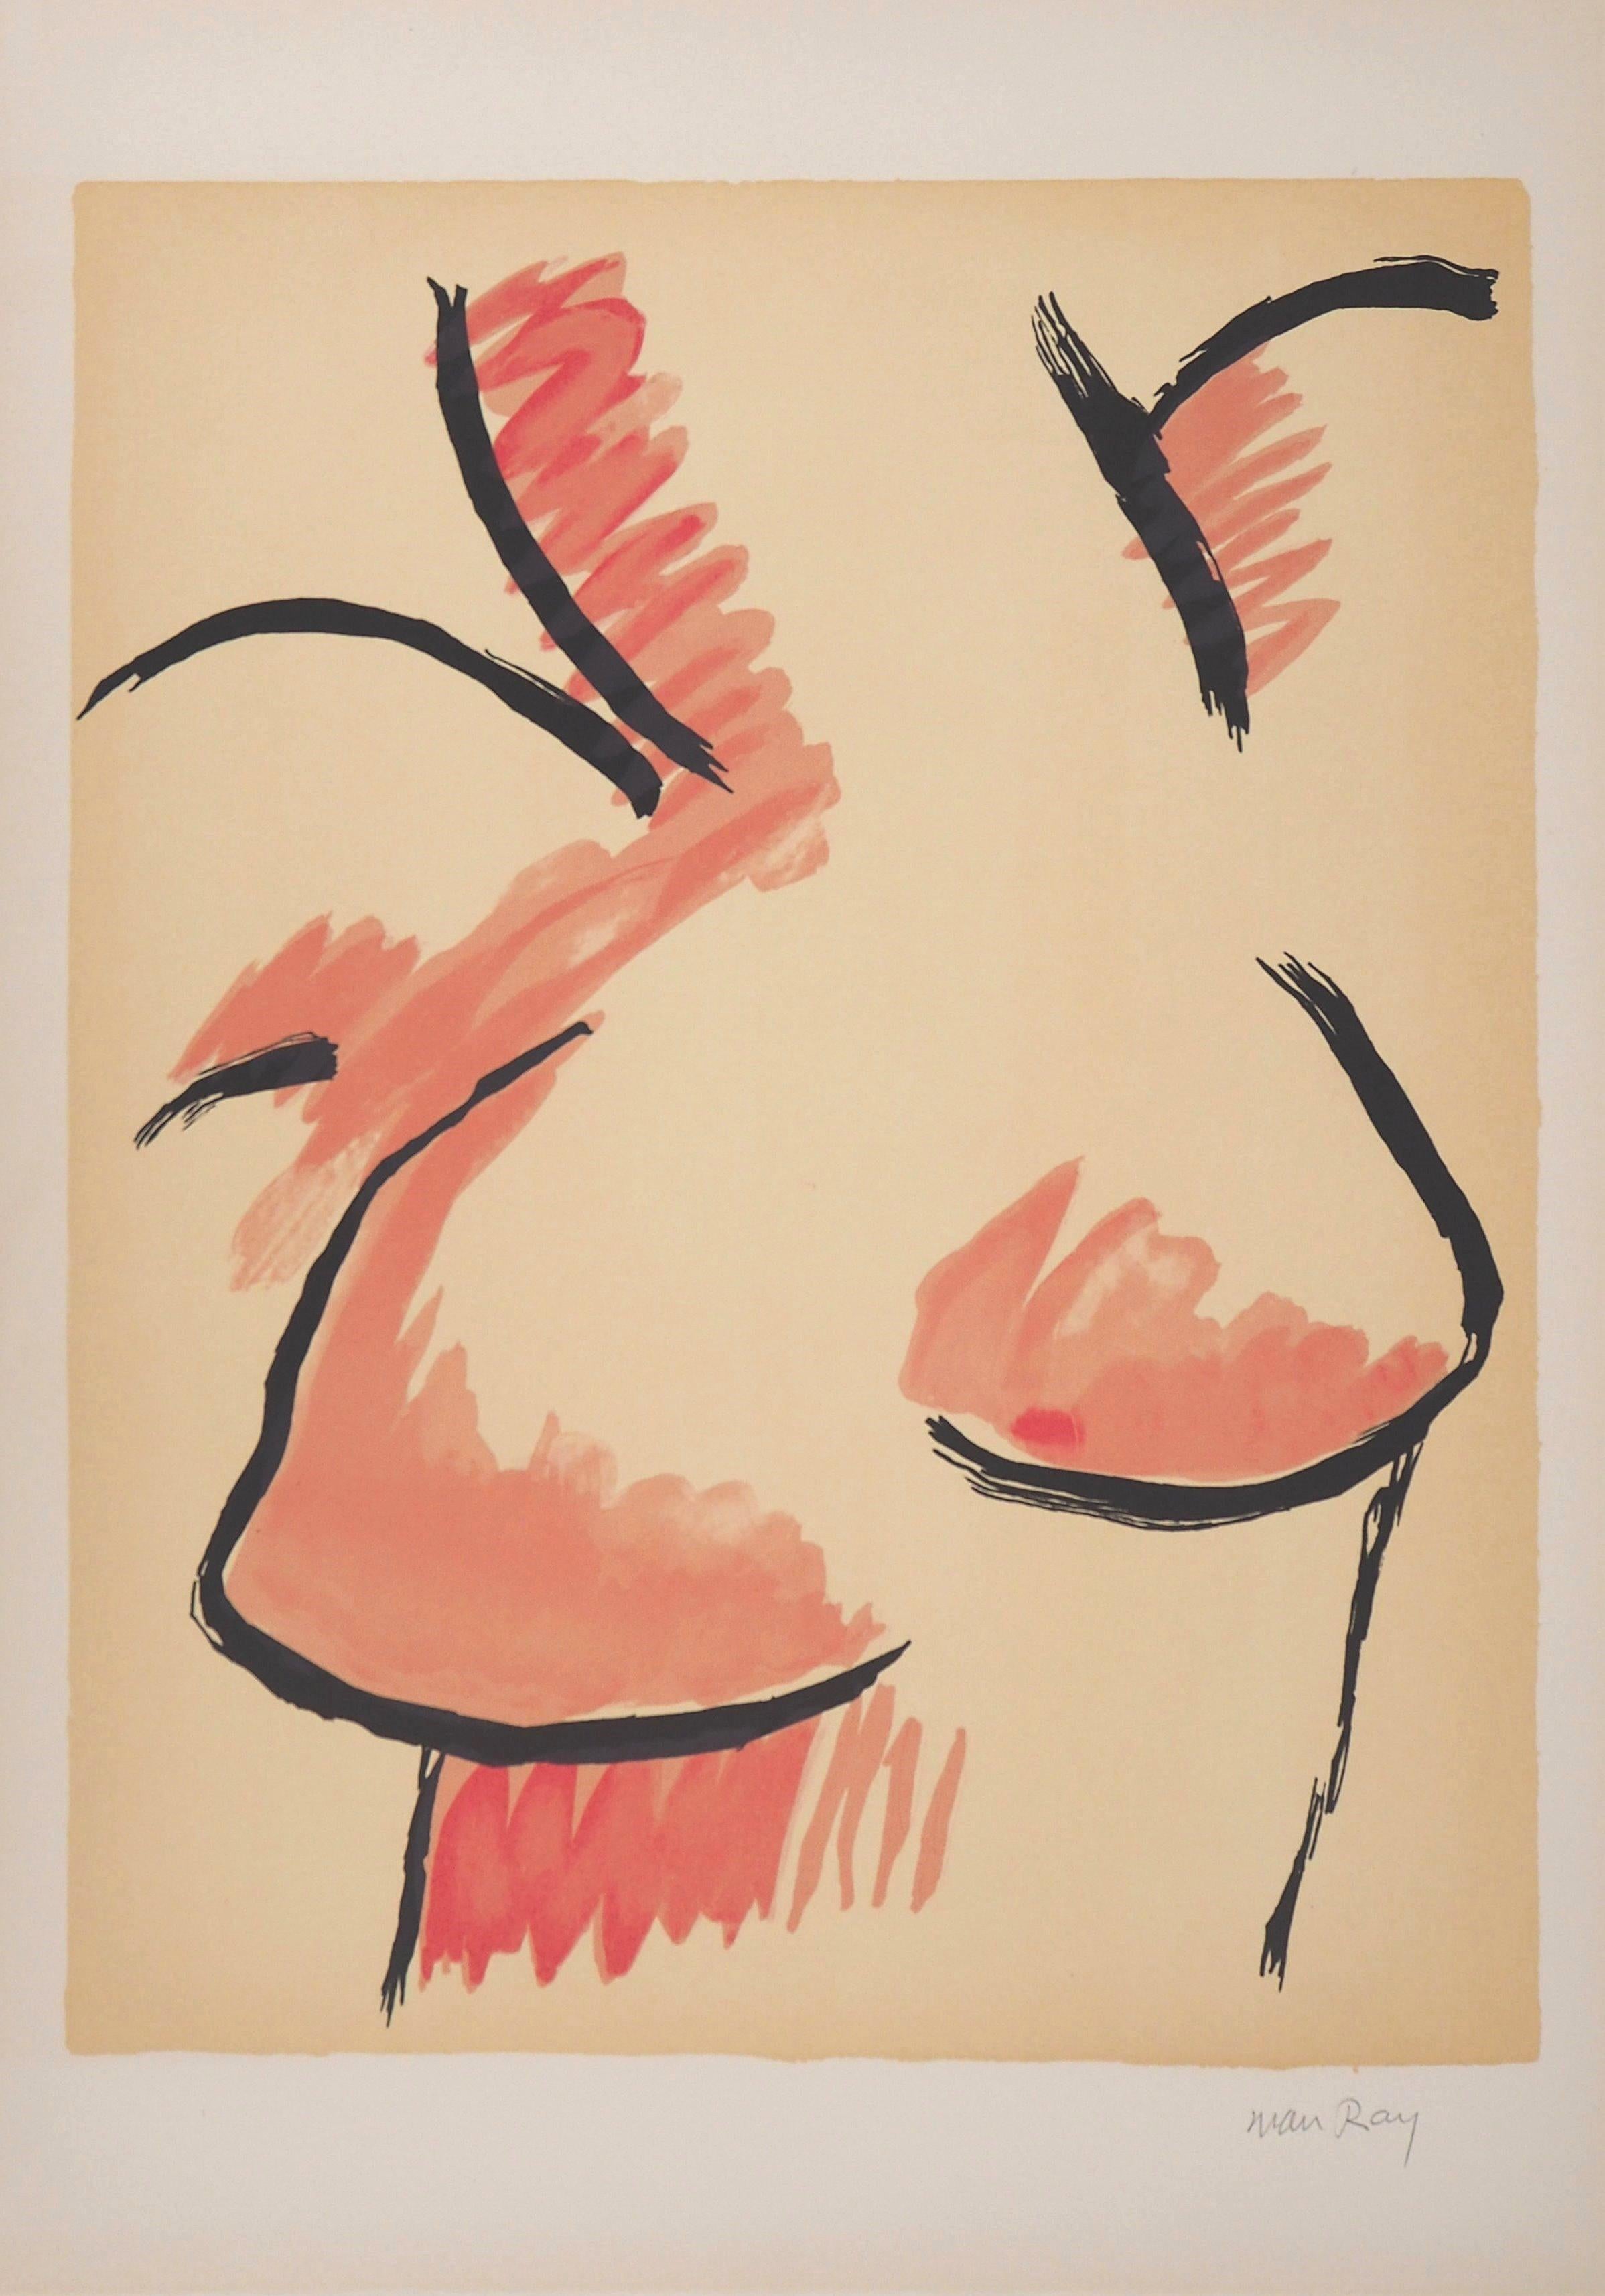 Woman Bust - Handsigned Original Lithograph - Beige Figurative Print by Man Ray